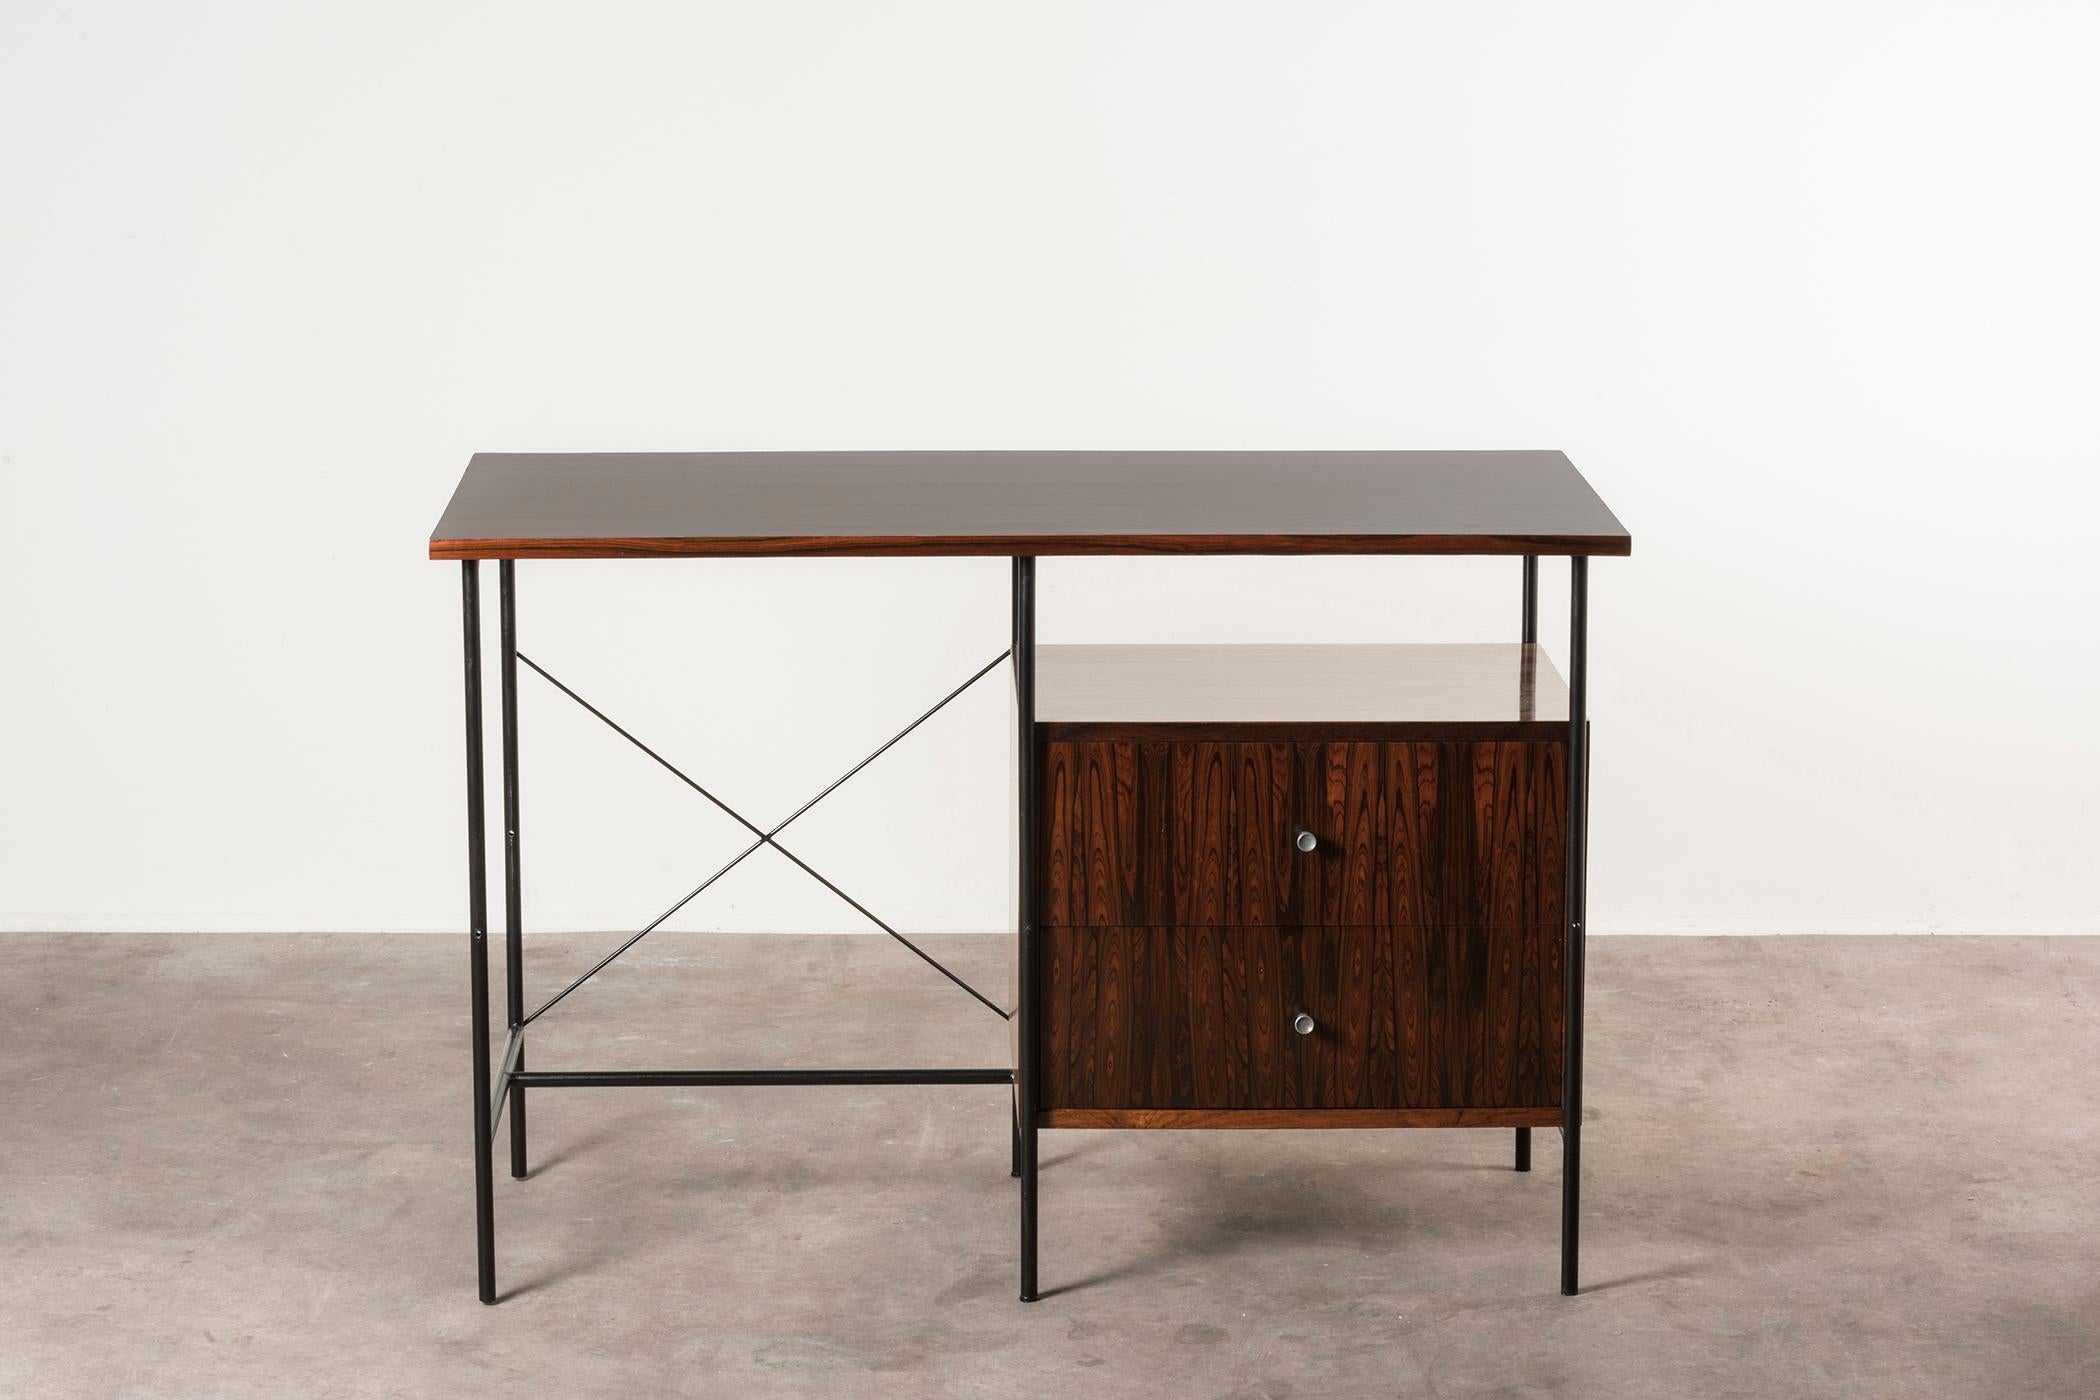 Desk by Geraldo de Barros. Brazil, 1950s. 
Manufactured by Unilabor. Wood, black painted metal, brass details. Measures: 109 x 52 x h 74 cm 
42.9 x 20.4 x h 28.9 in.
Item in fair condition, slight signs of wear and tear on wooden frame and metal